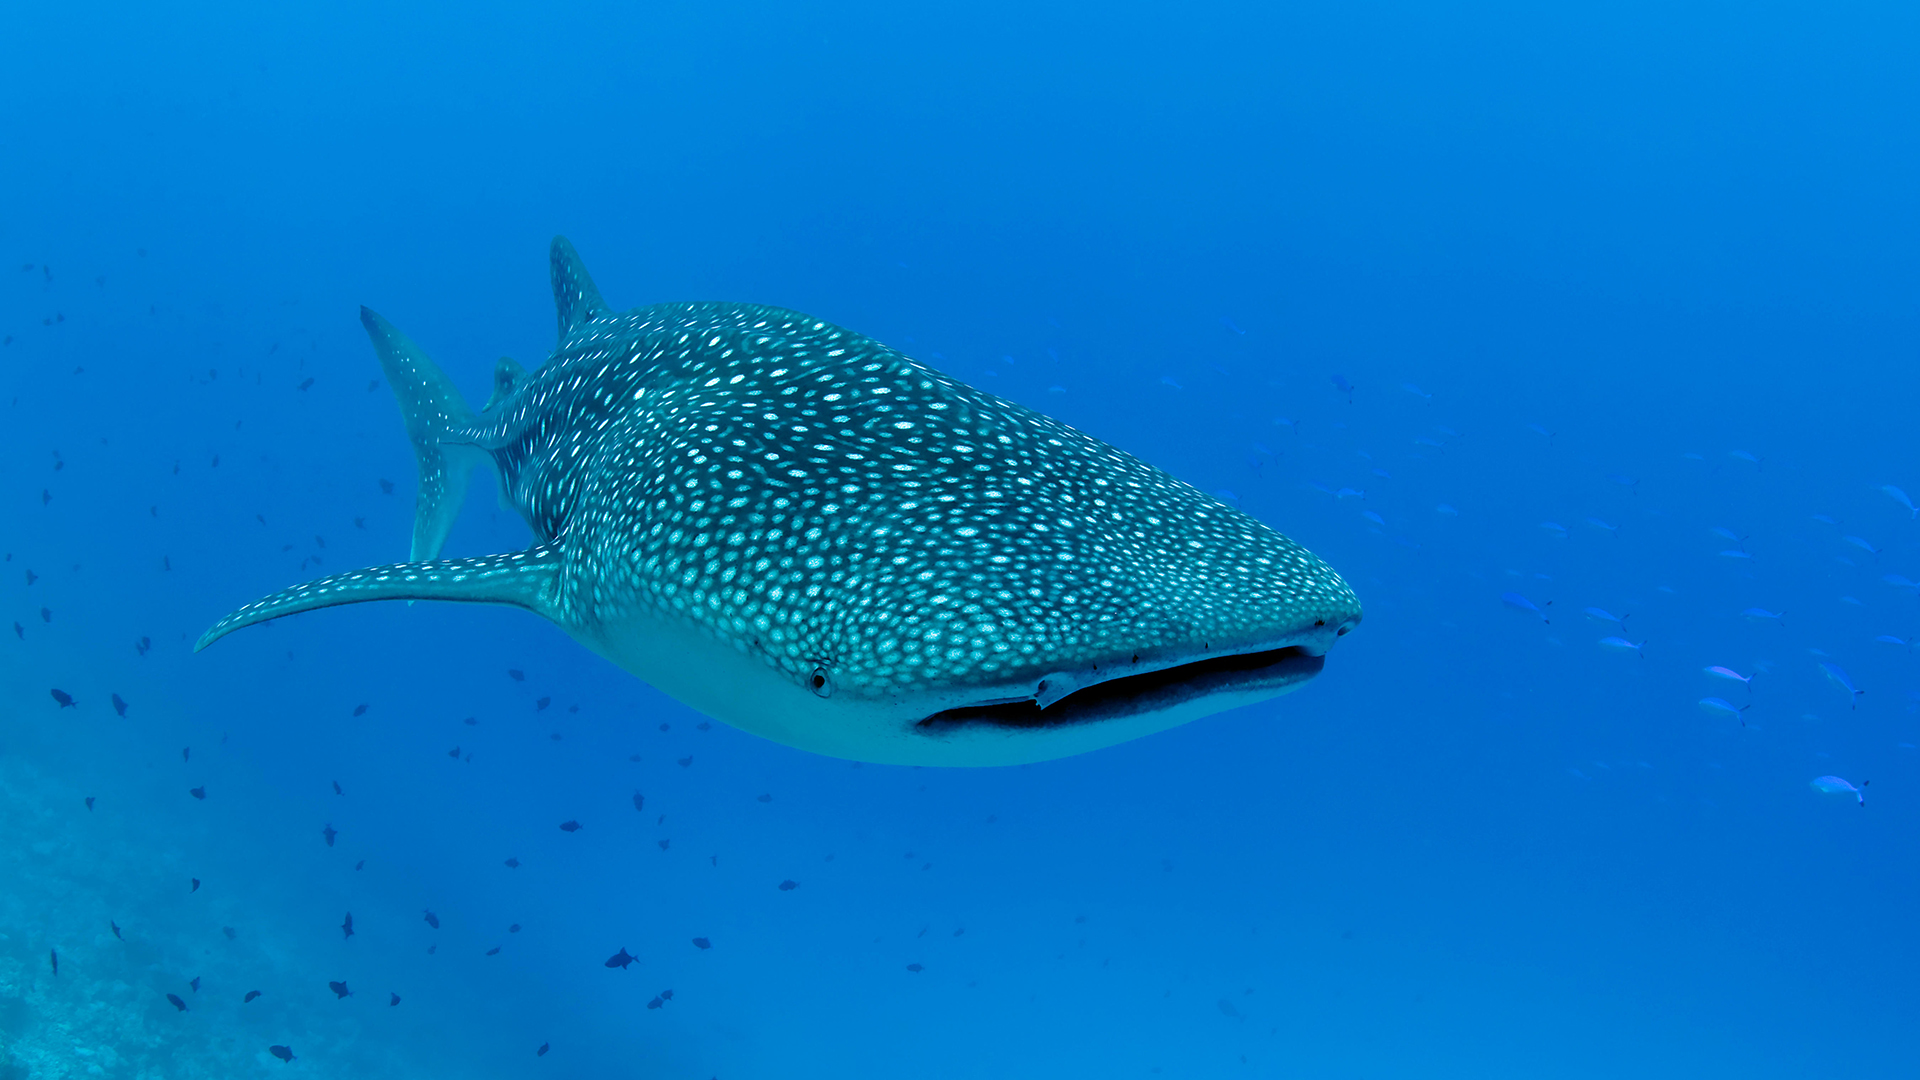 The whale shark (Rhincodon typus) is the largest living fish species.